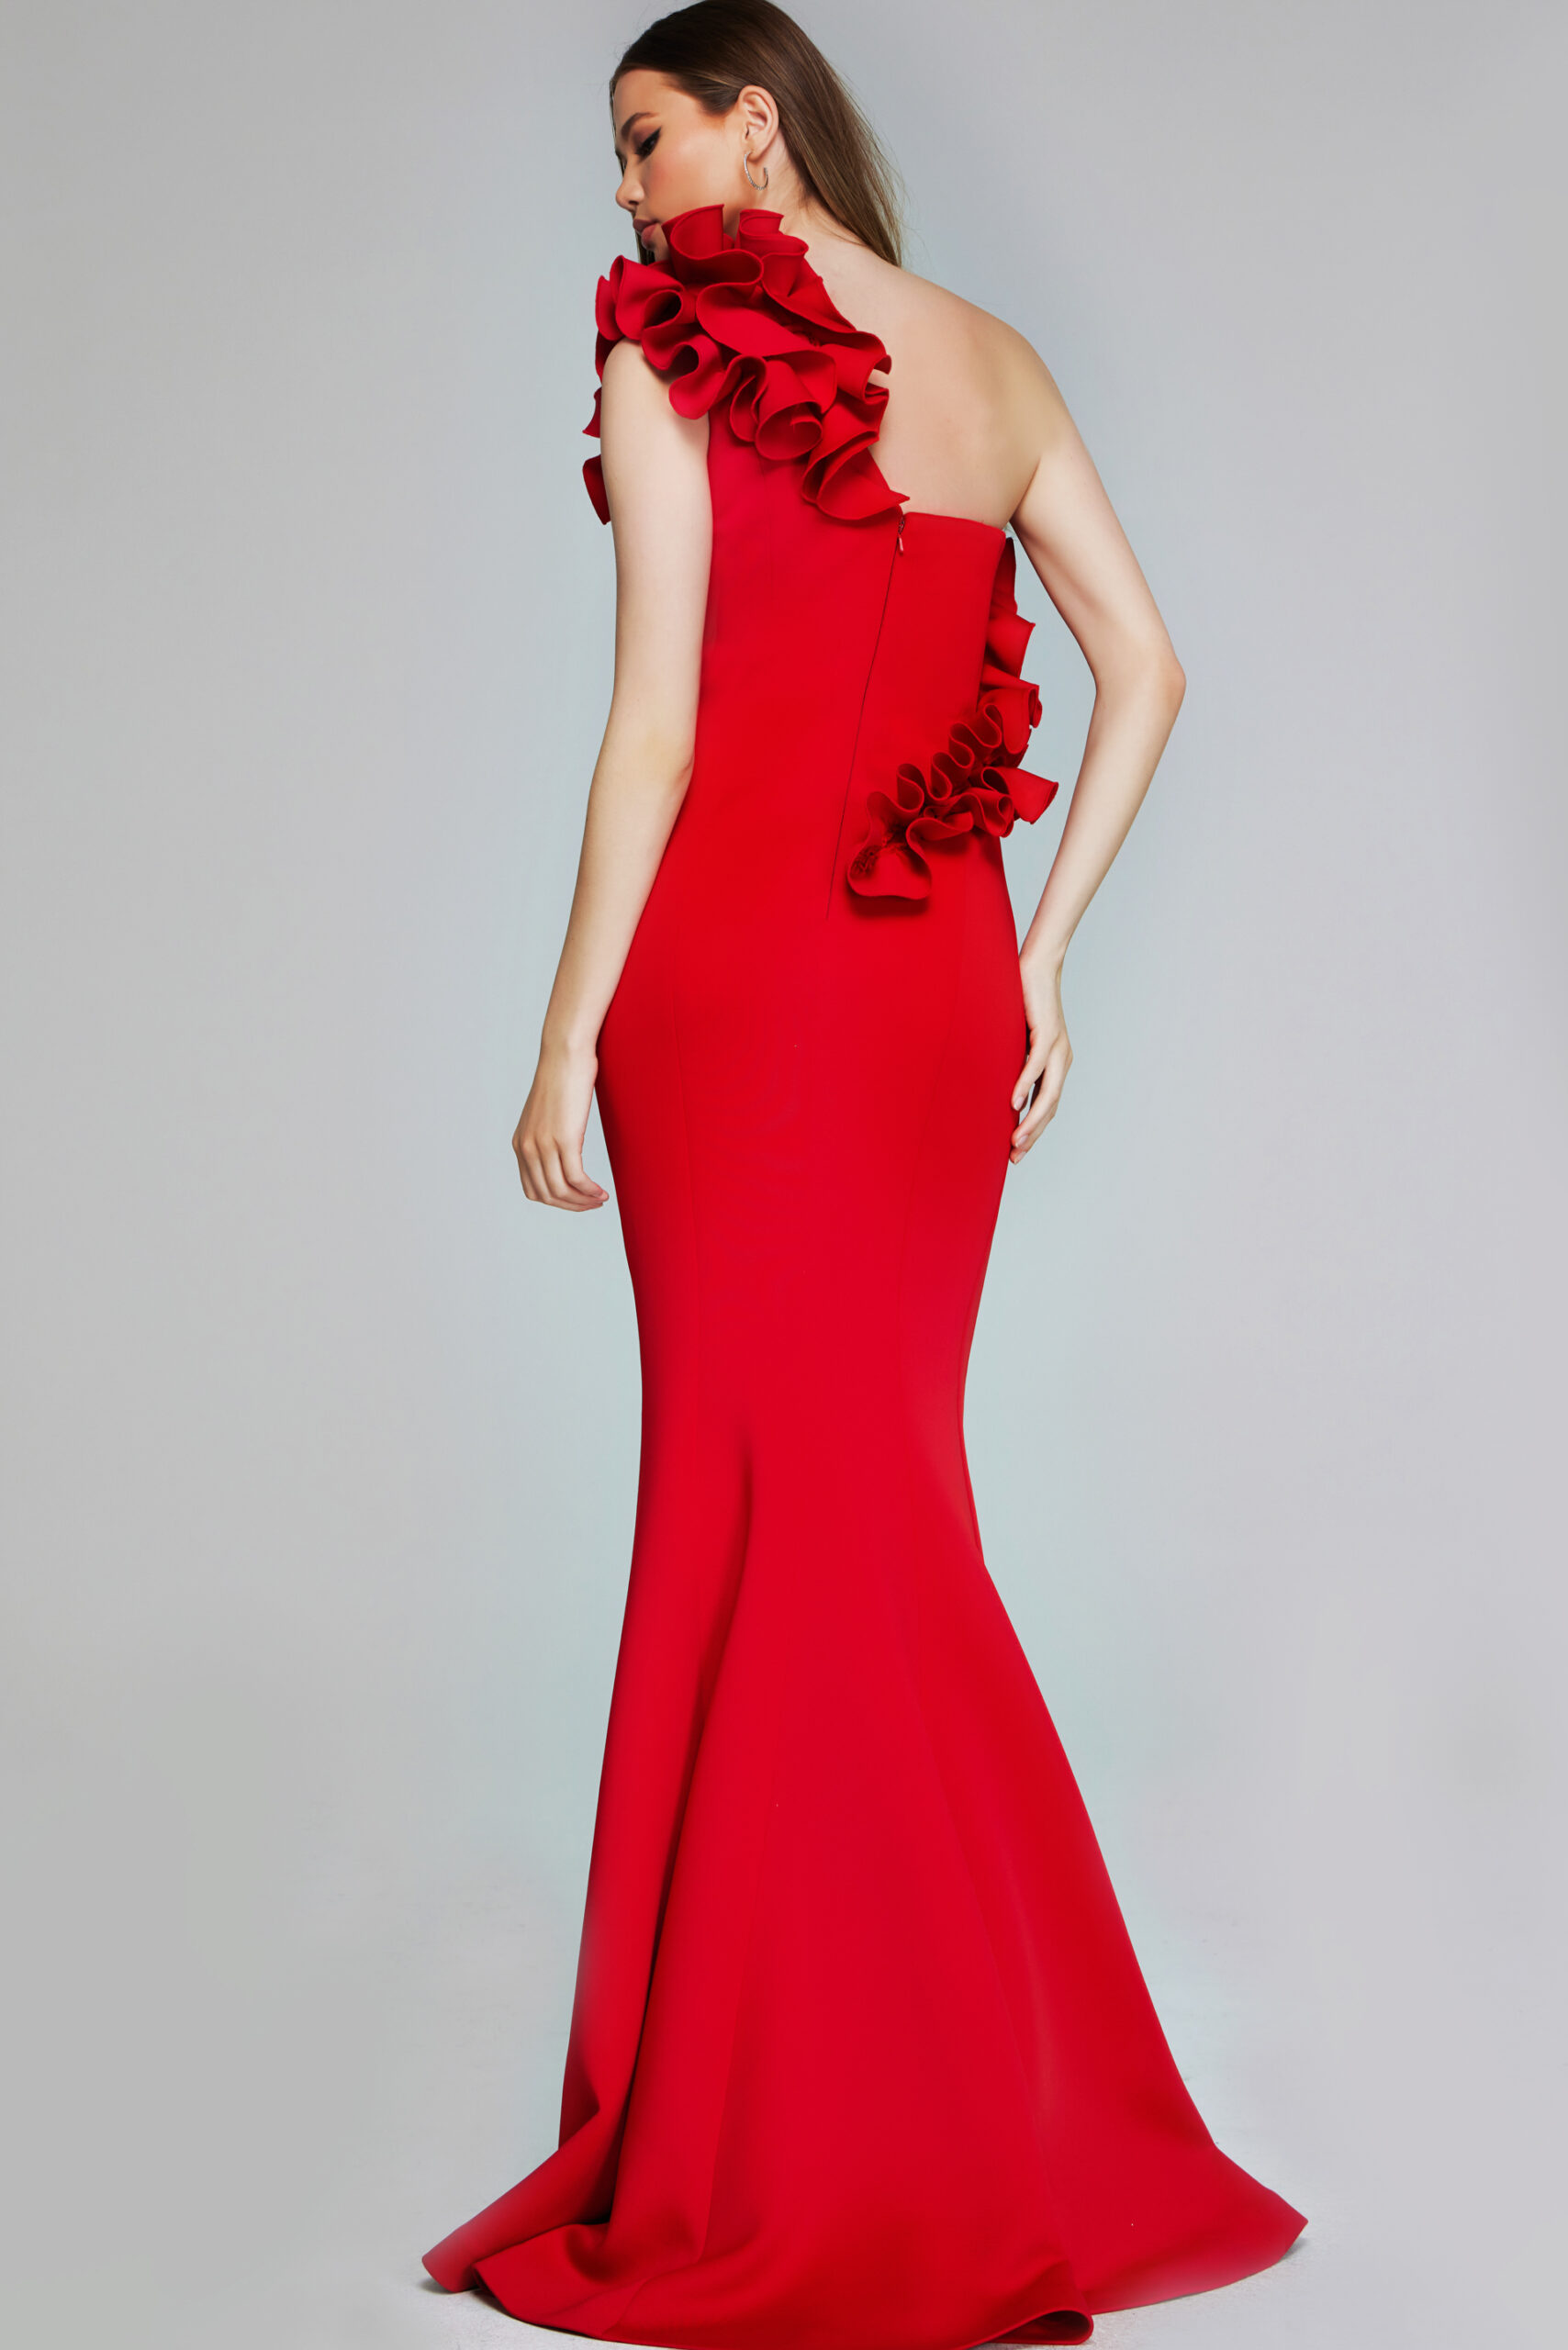 Enchanting One-Shoulder Red Gown with 3D Floral Appliqué 39751